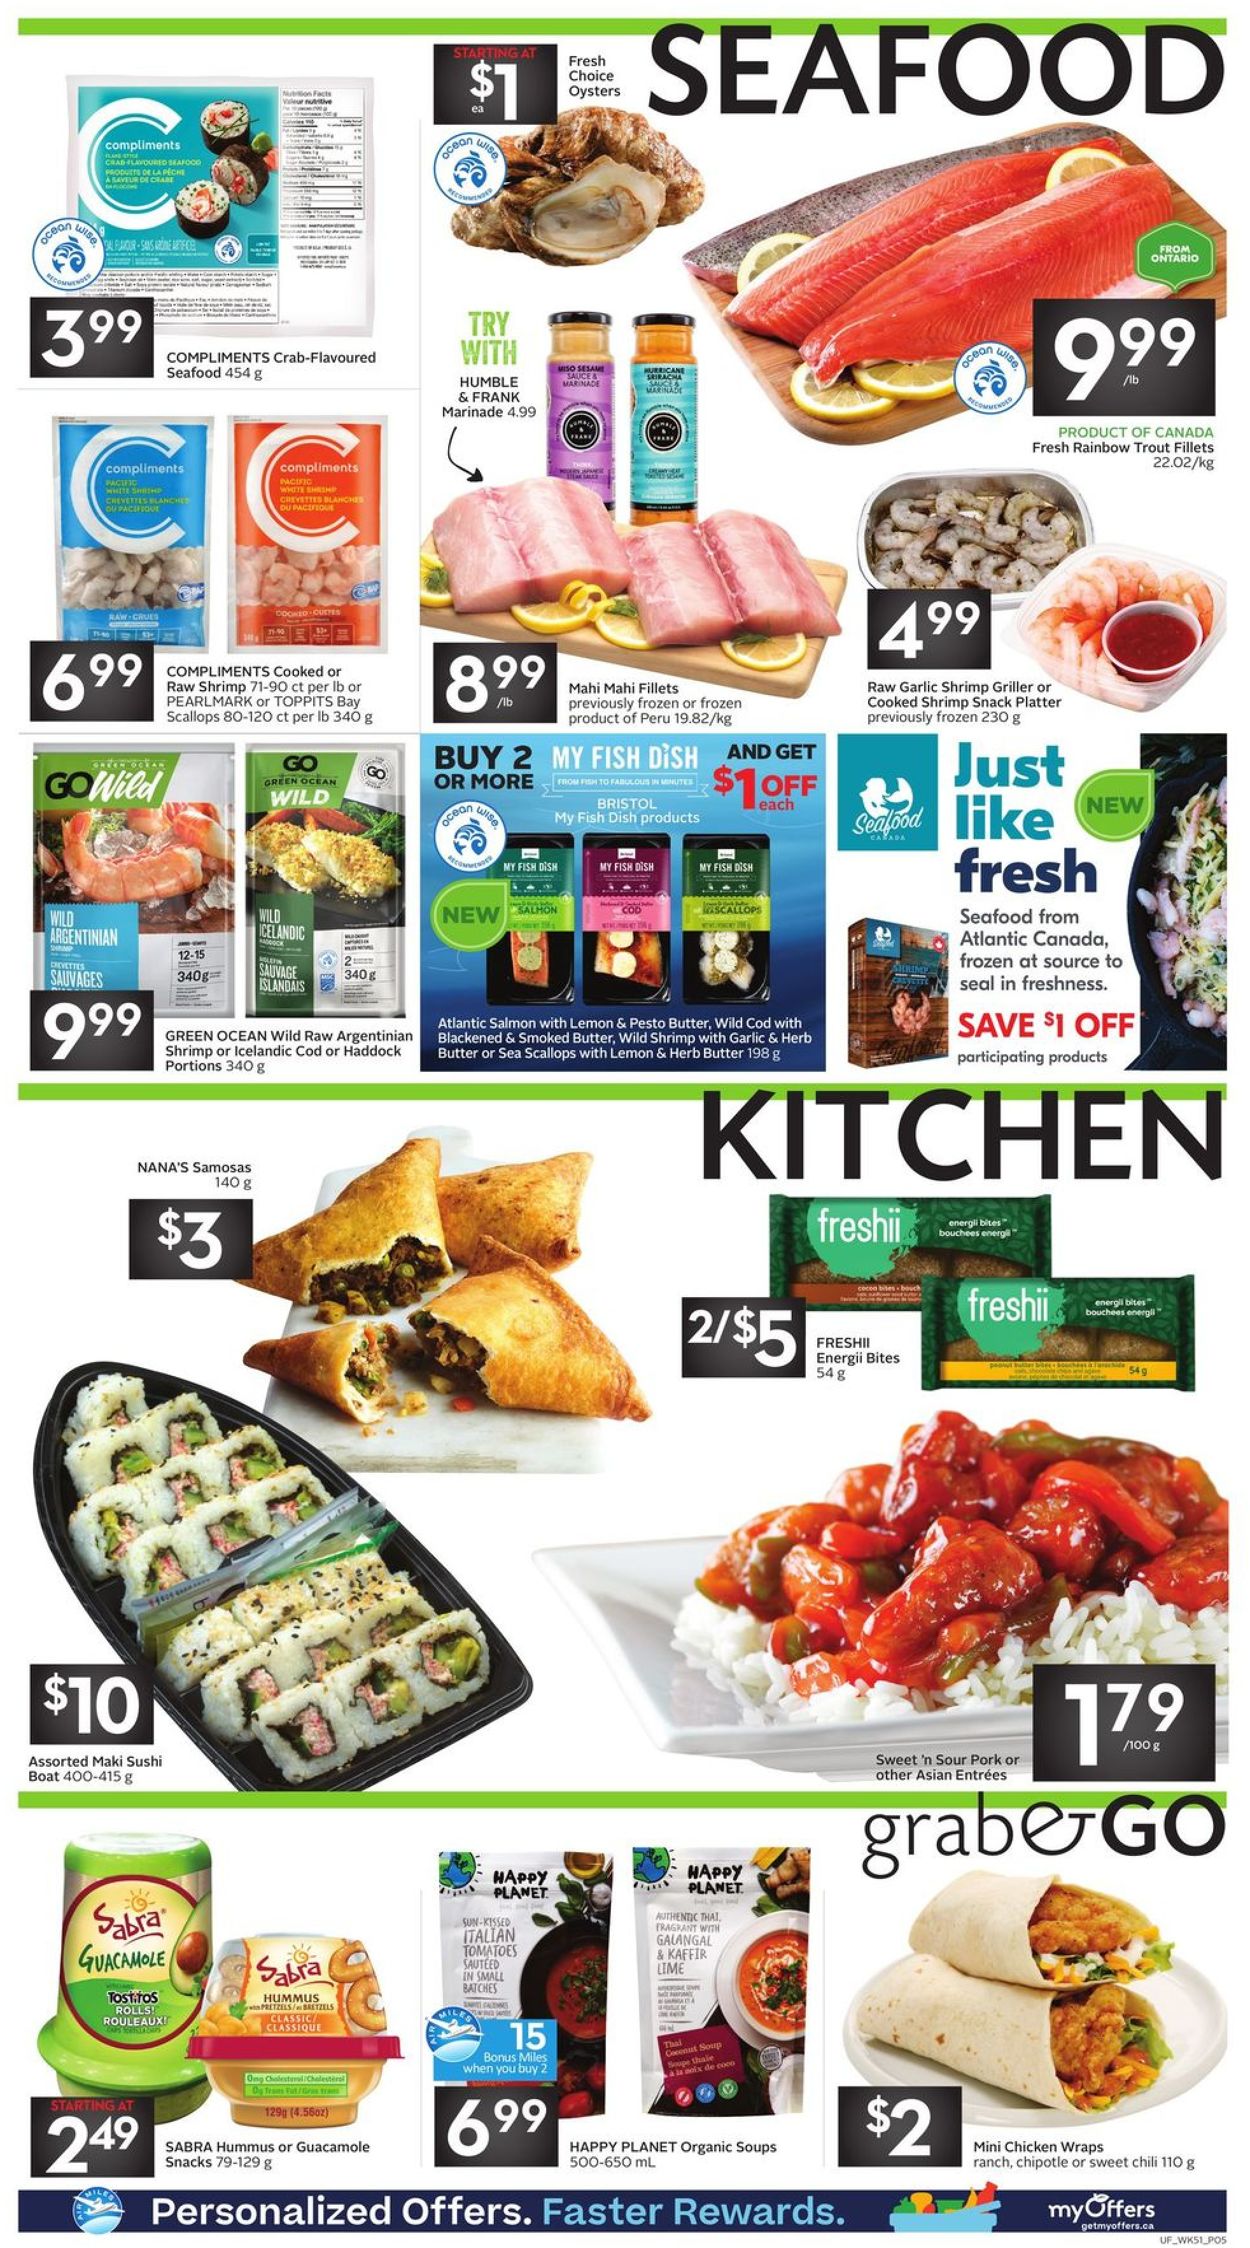 Sobeys Flyer from 04/15/2021